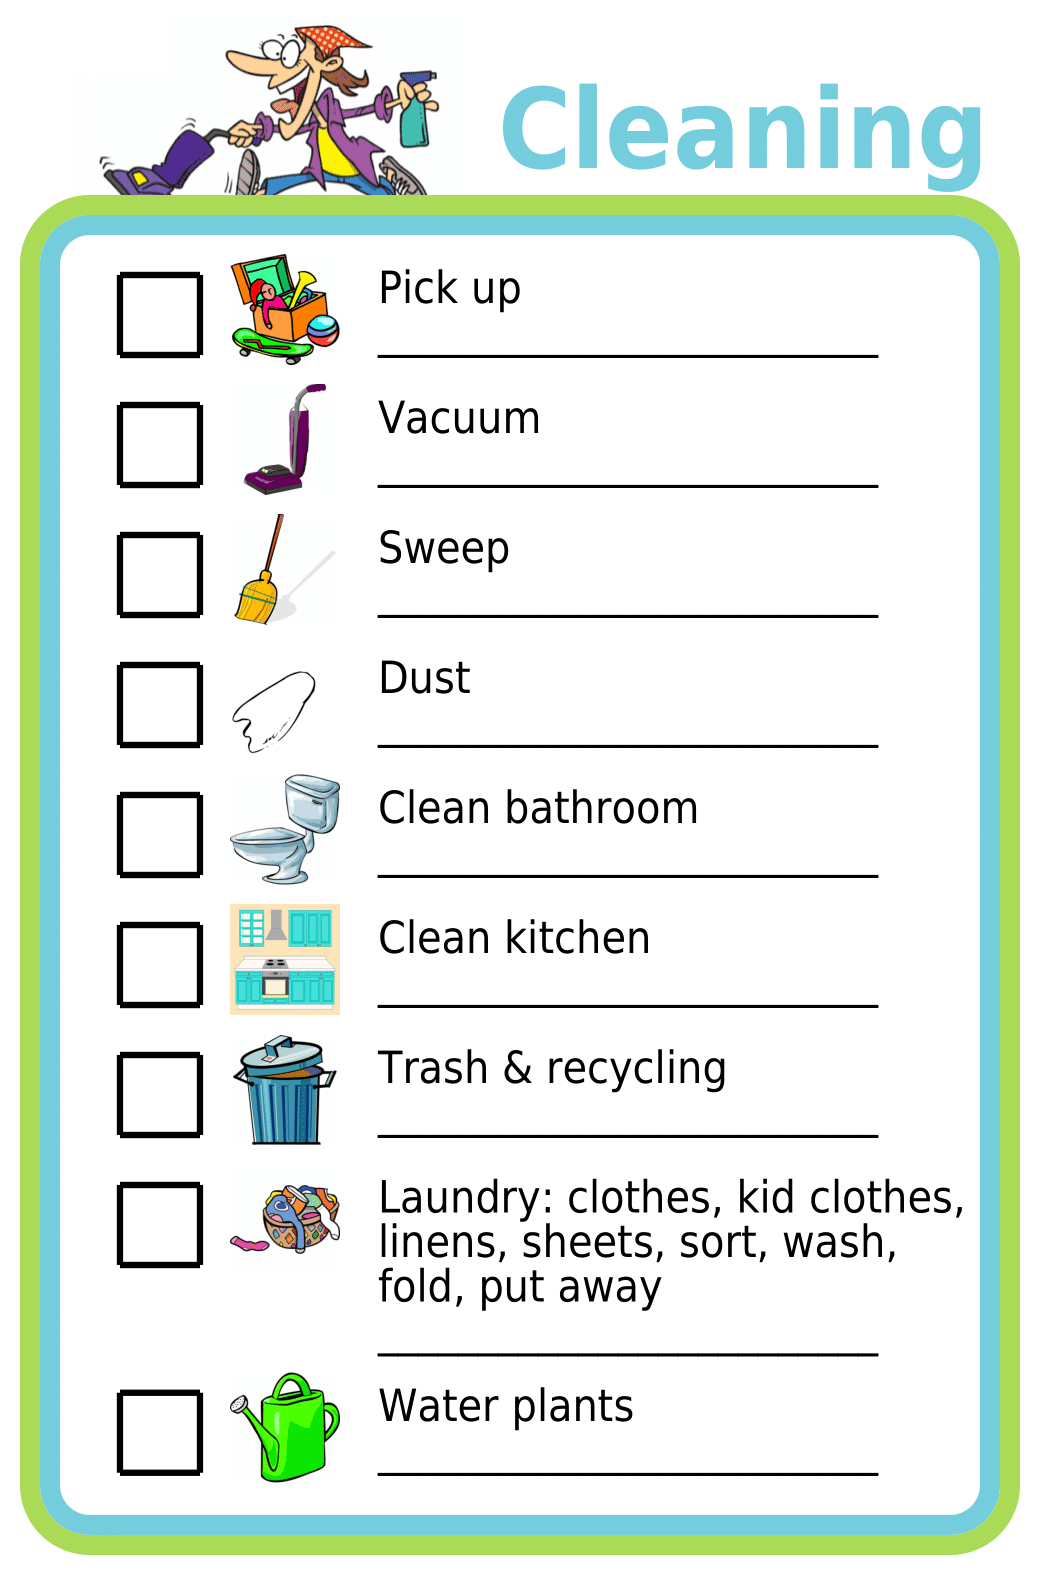 Editable worksheet showing 9 cleaning tasks: pick up, vacuum, sweep, dust, clean bathroom, clean kitchen, trash/recycling, laundry, plants